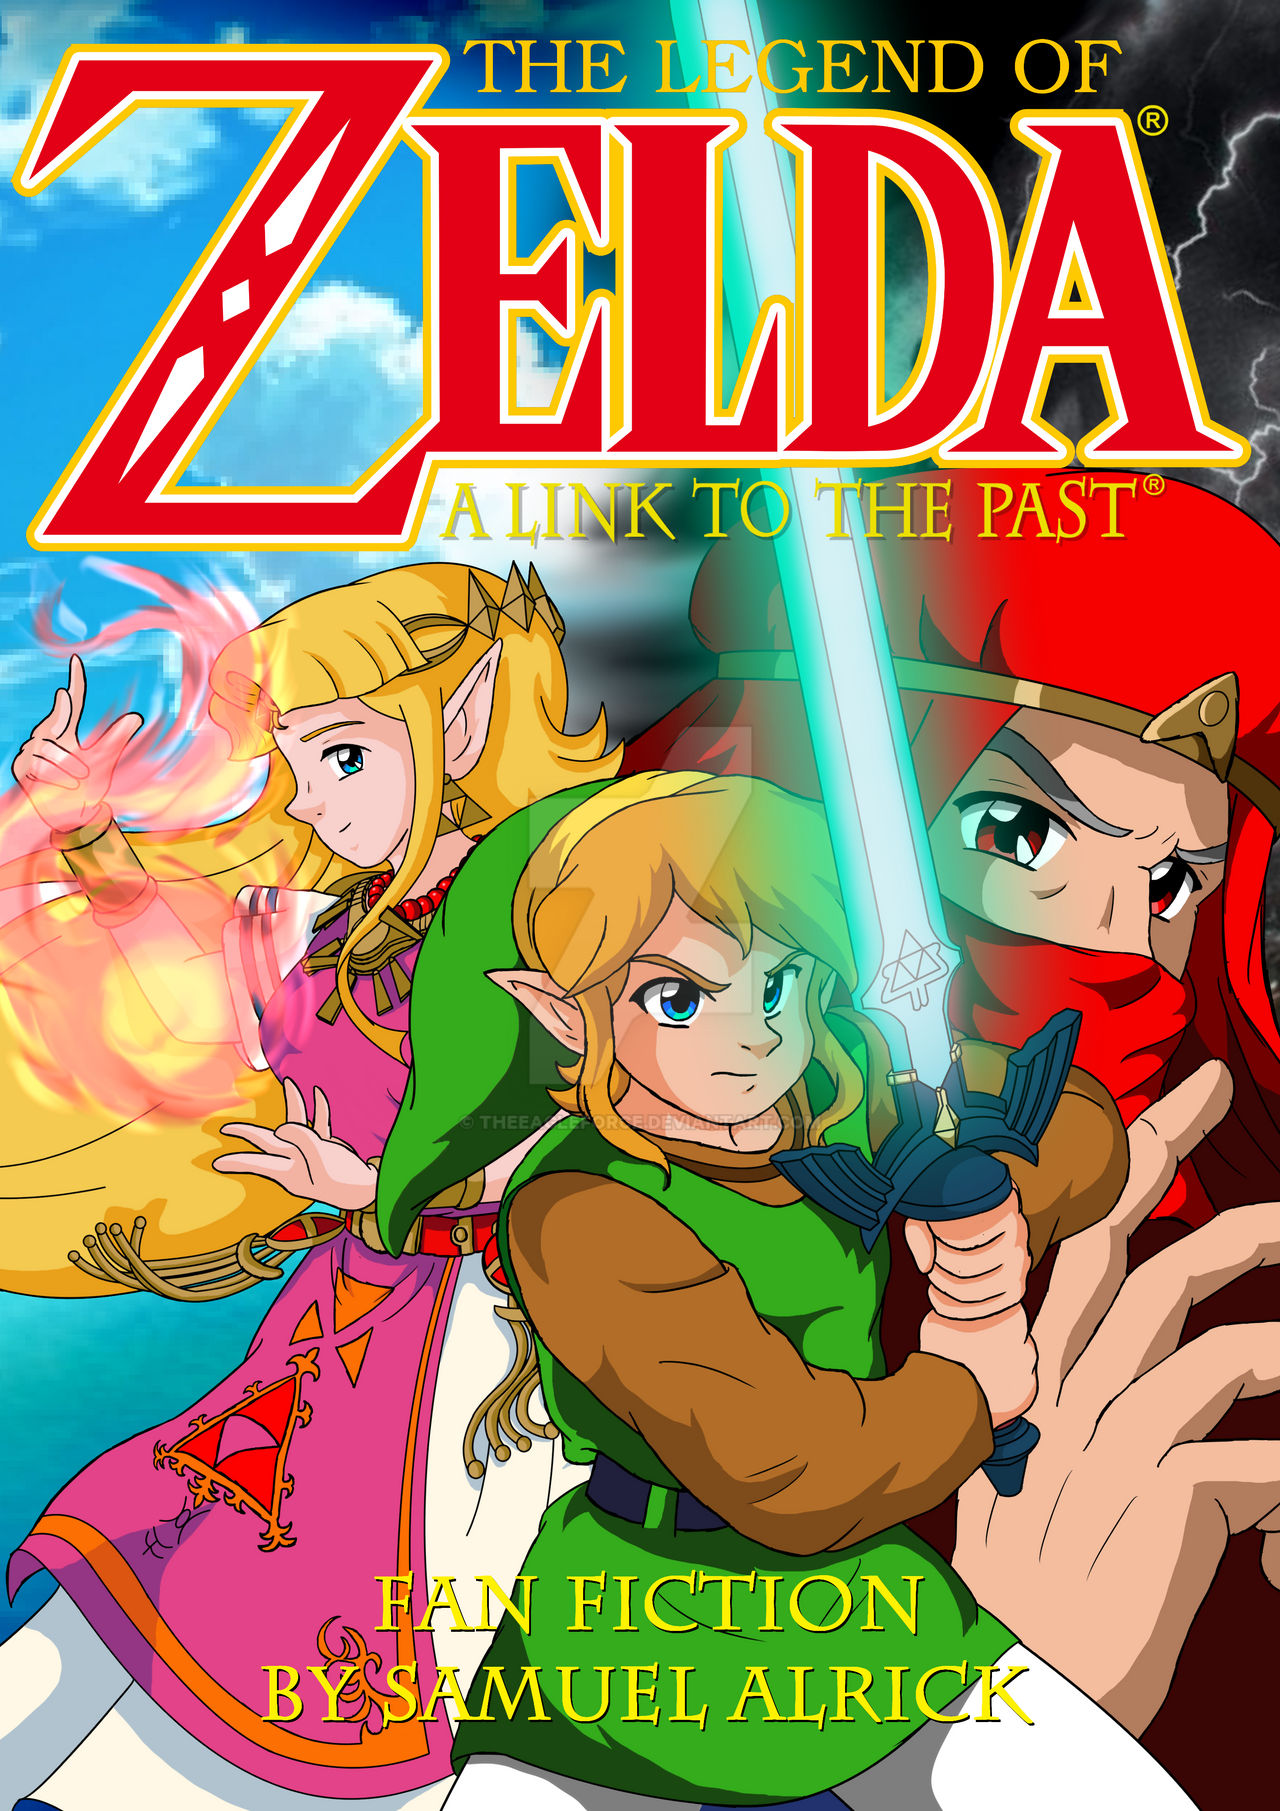 A Link To The Past Comic A Link to the Past Fan Fiction cover by TheEagleForce on DeviantArt